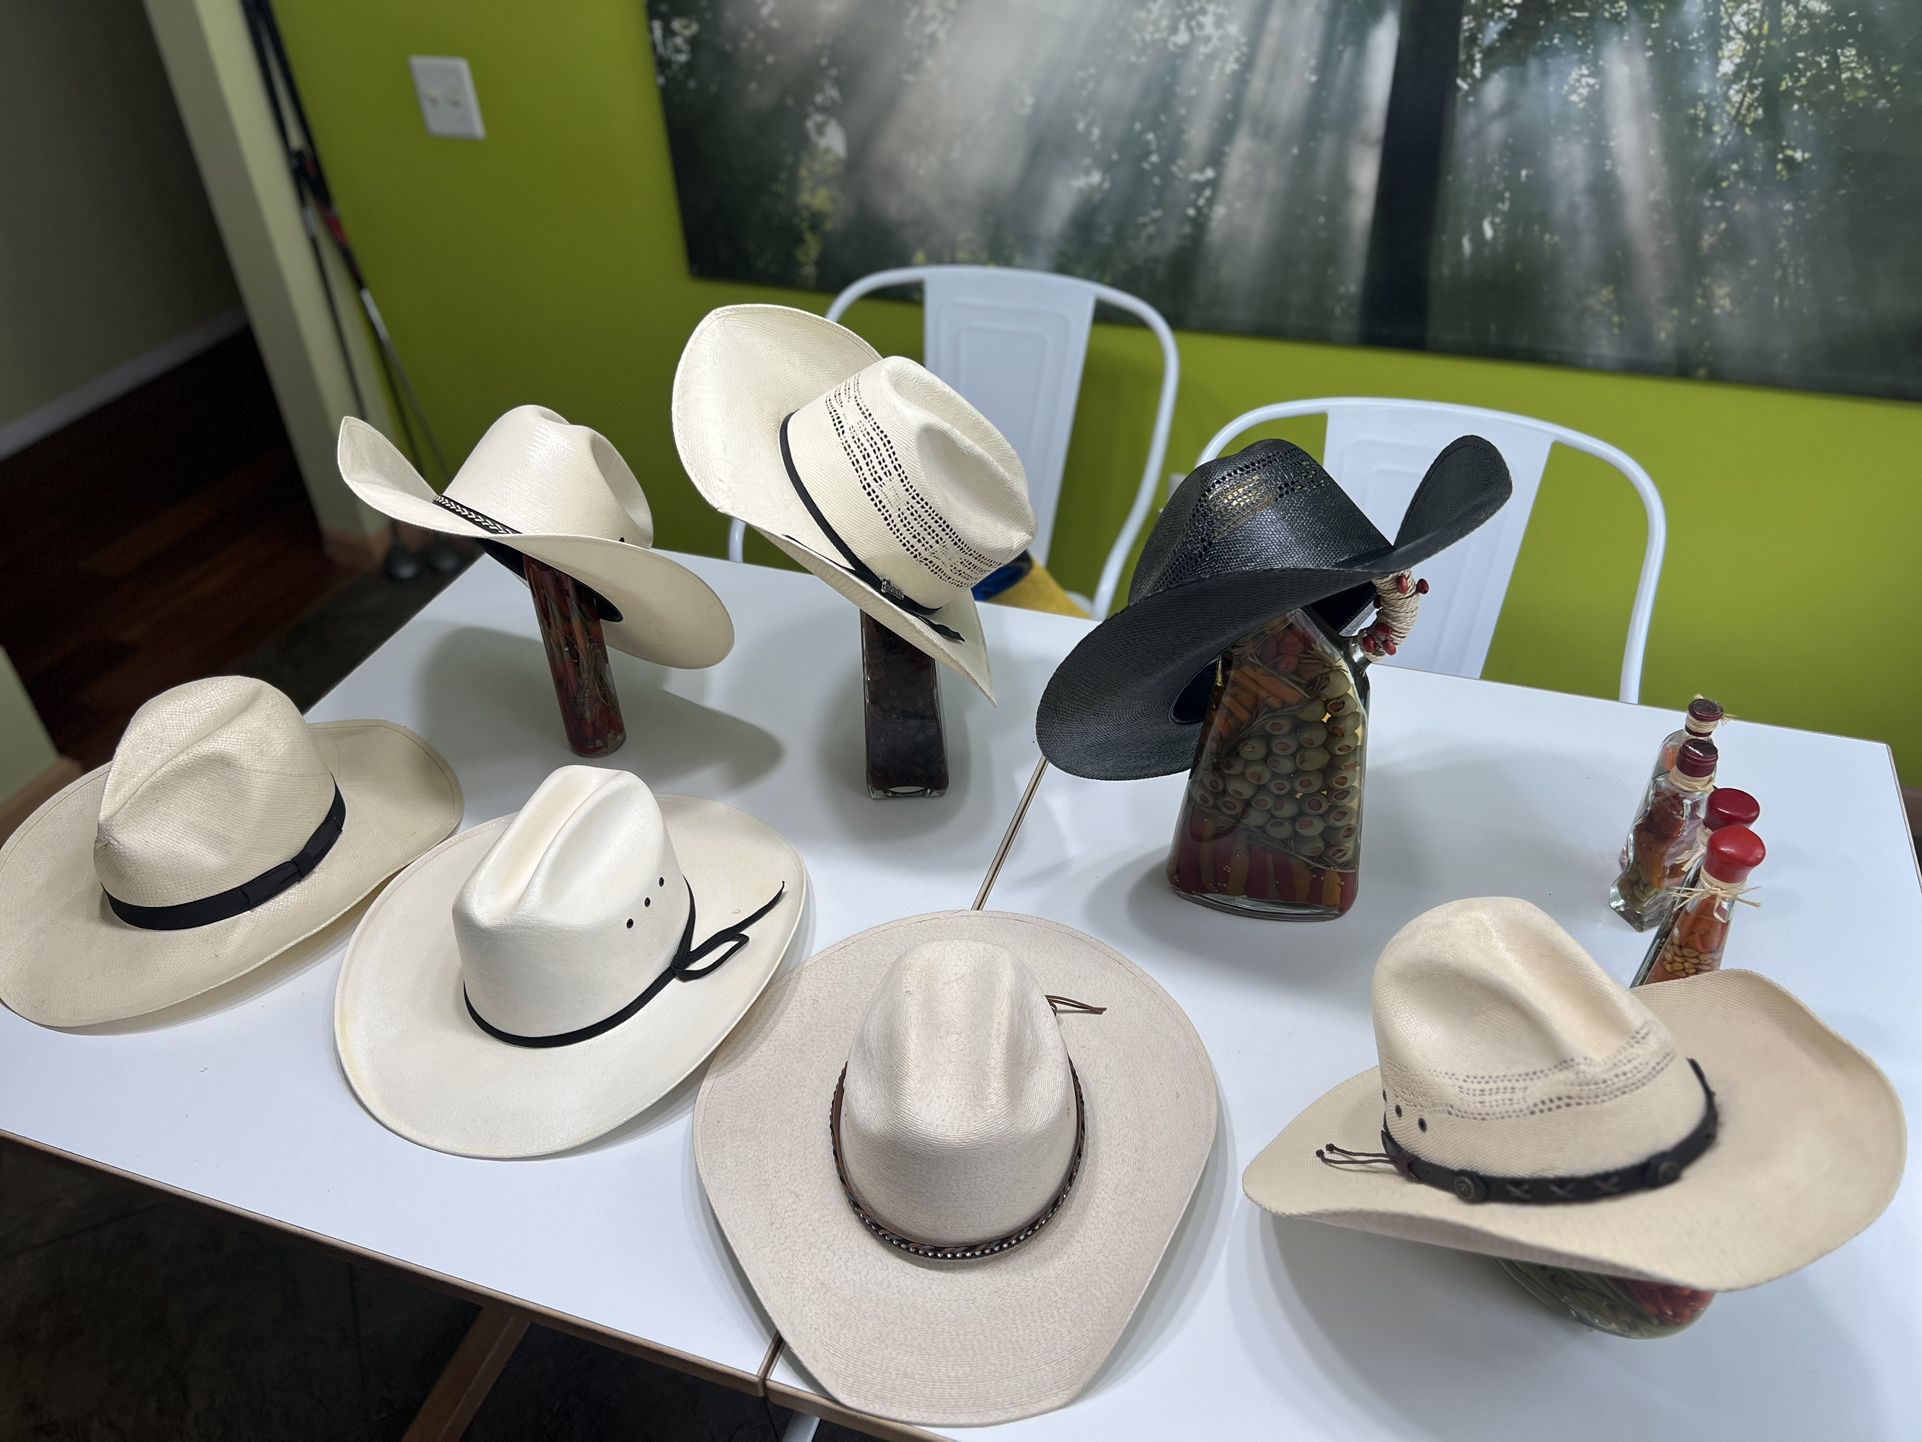 Western straw hats, assorted sizes, ask, $49 each